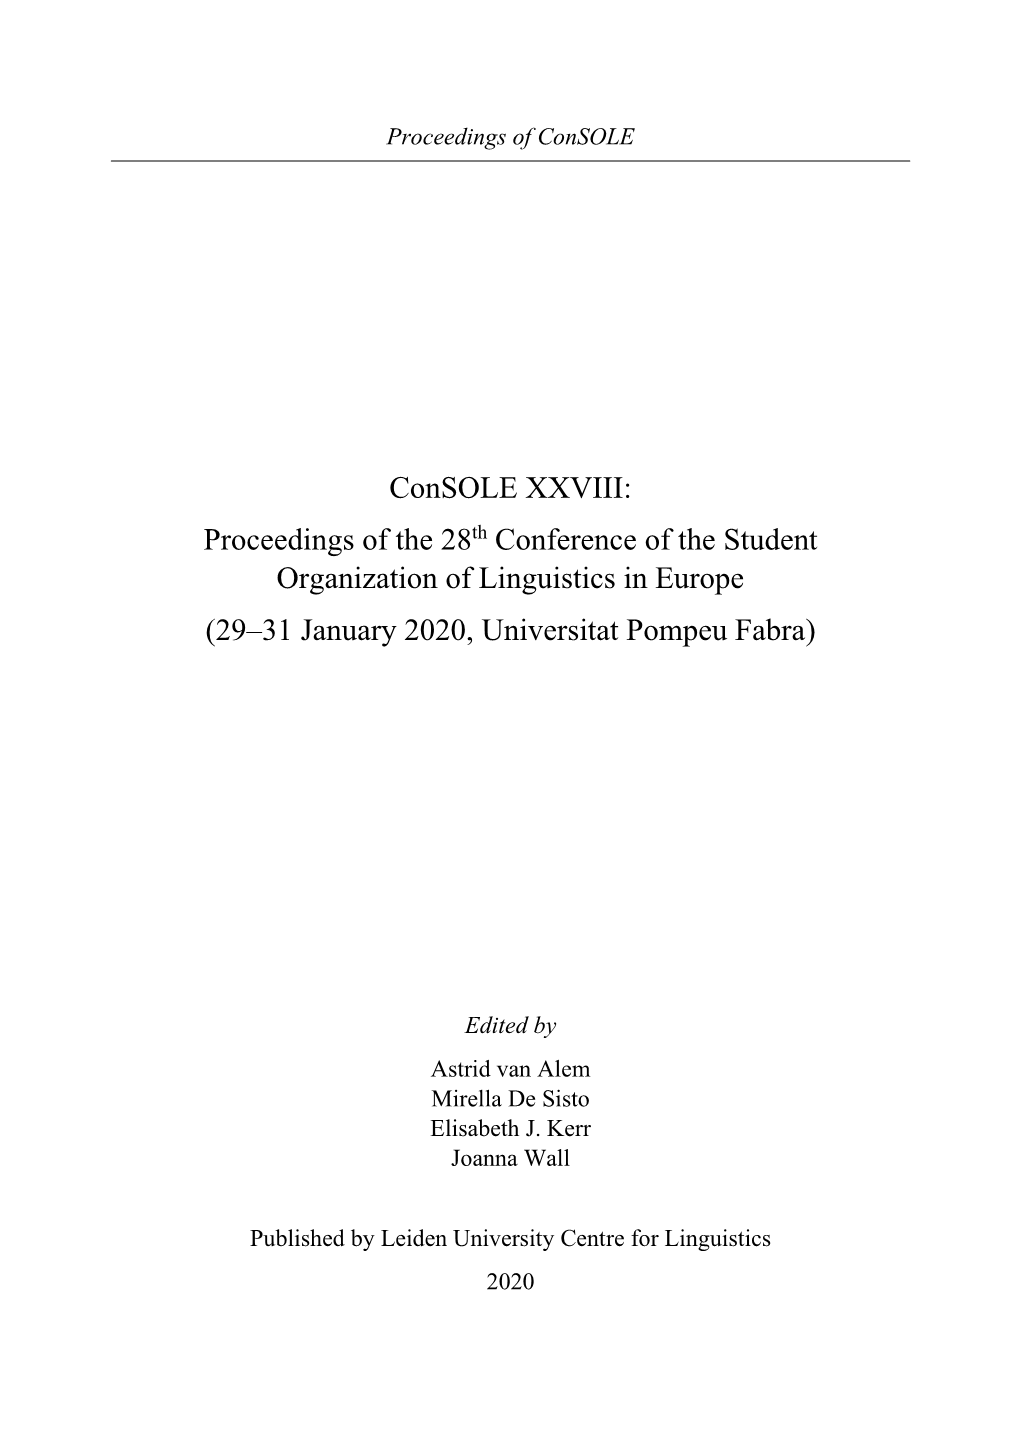 Console XXVIII: Proceedings of the 28Th Conference of the Student Organization of Linguistics in Europe (29–31 January 2020, Universitat Pompeu Fabra)